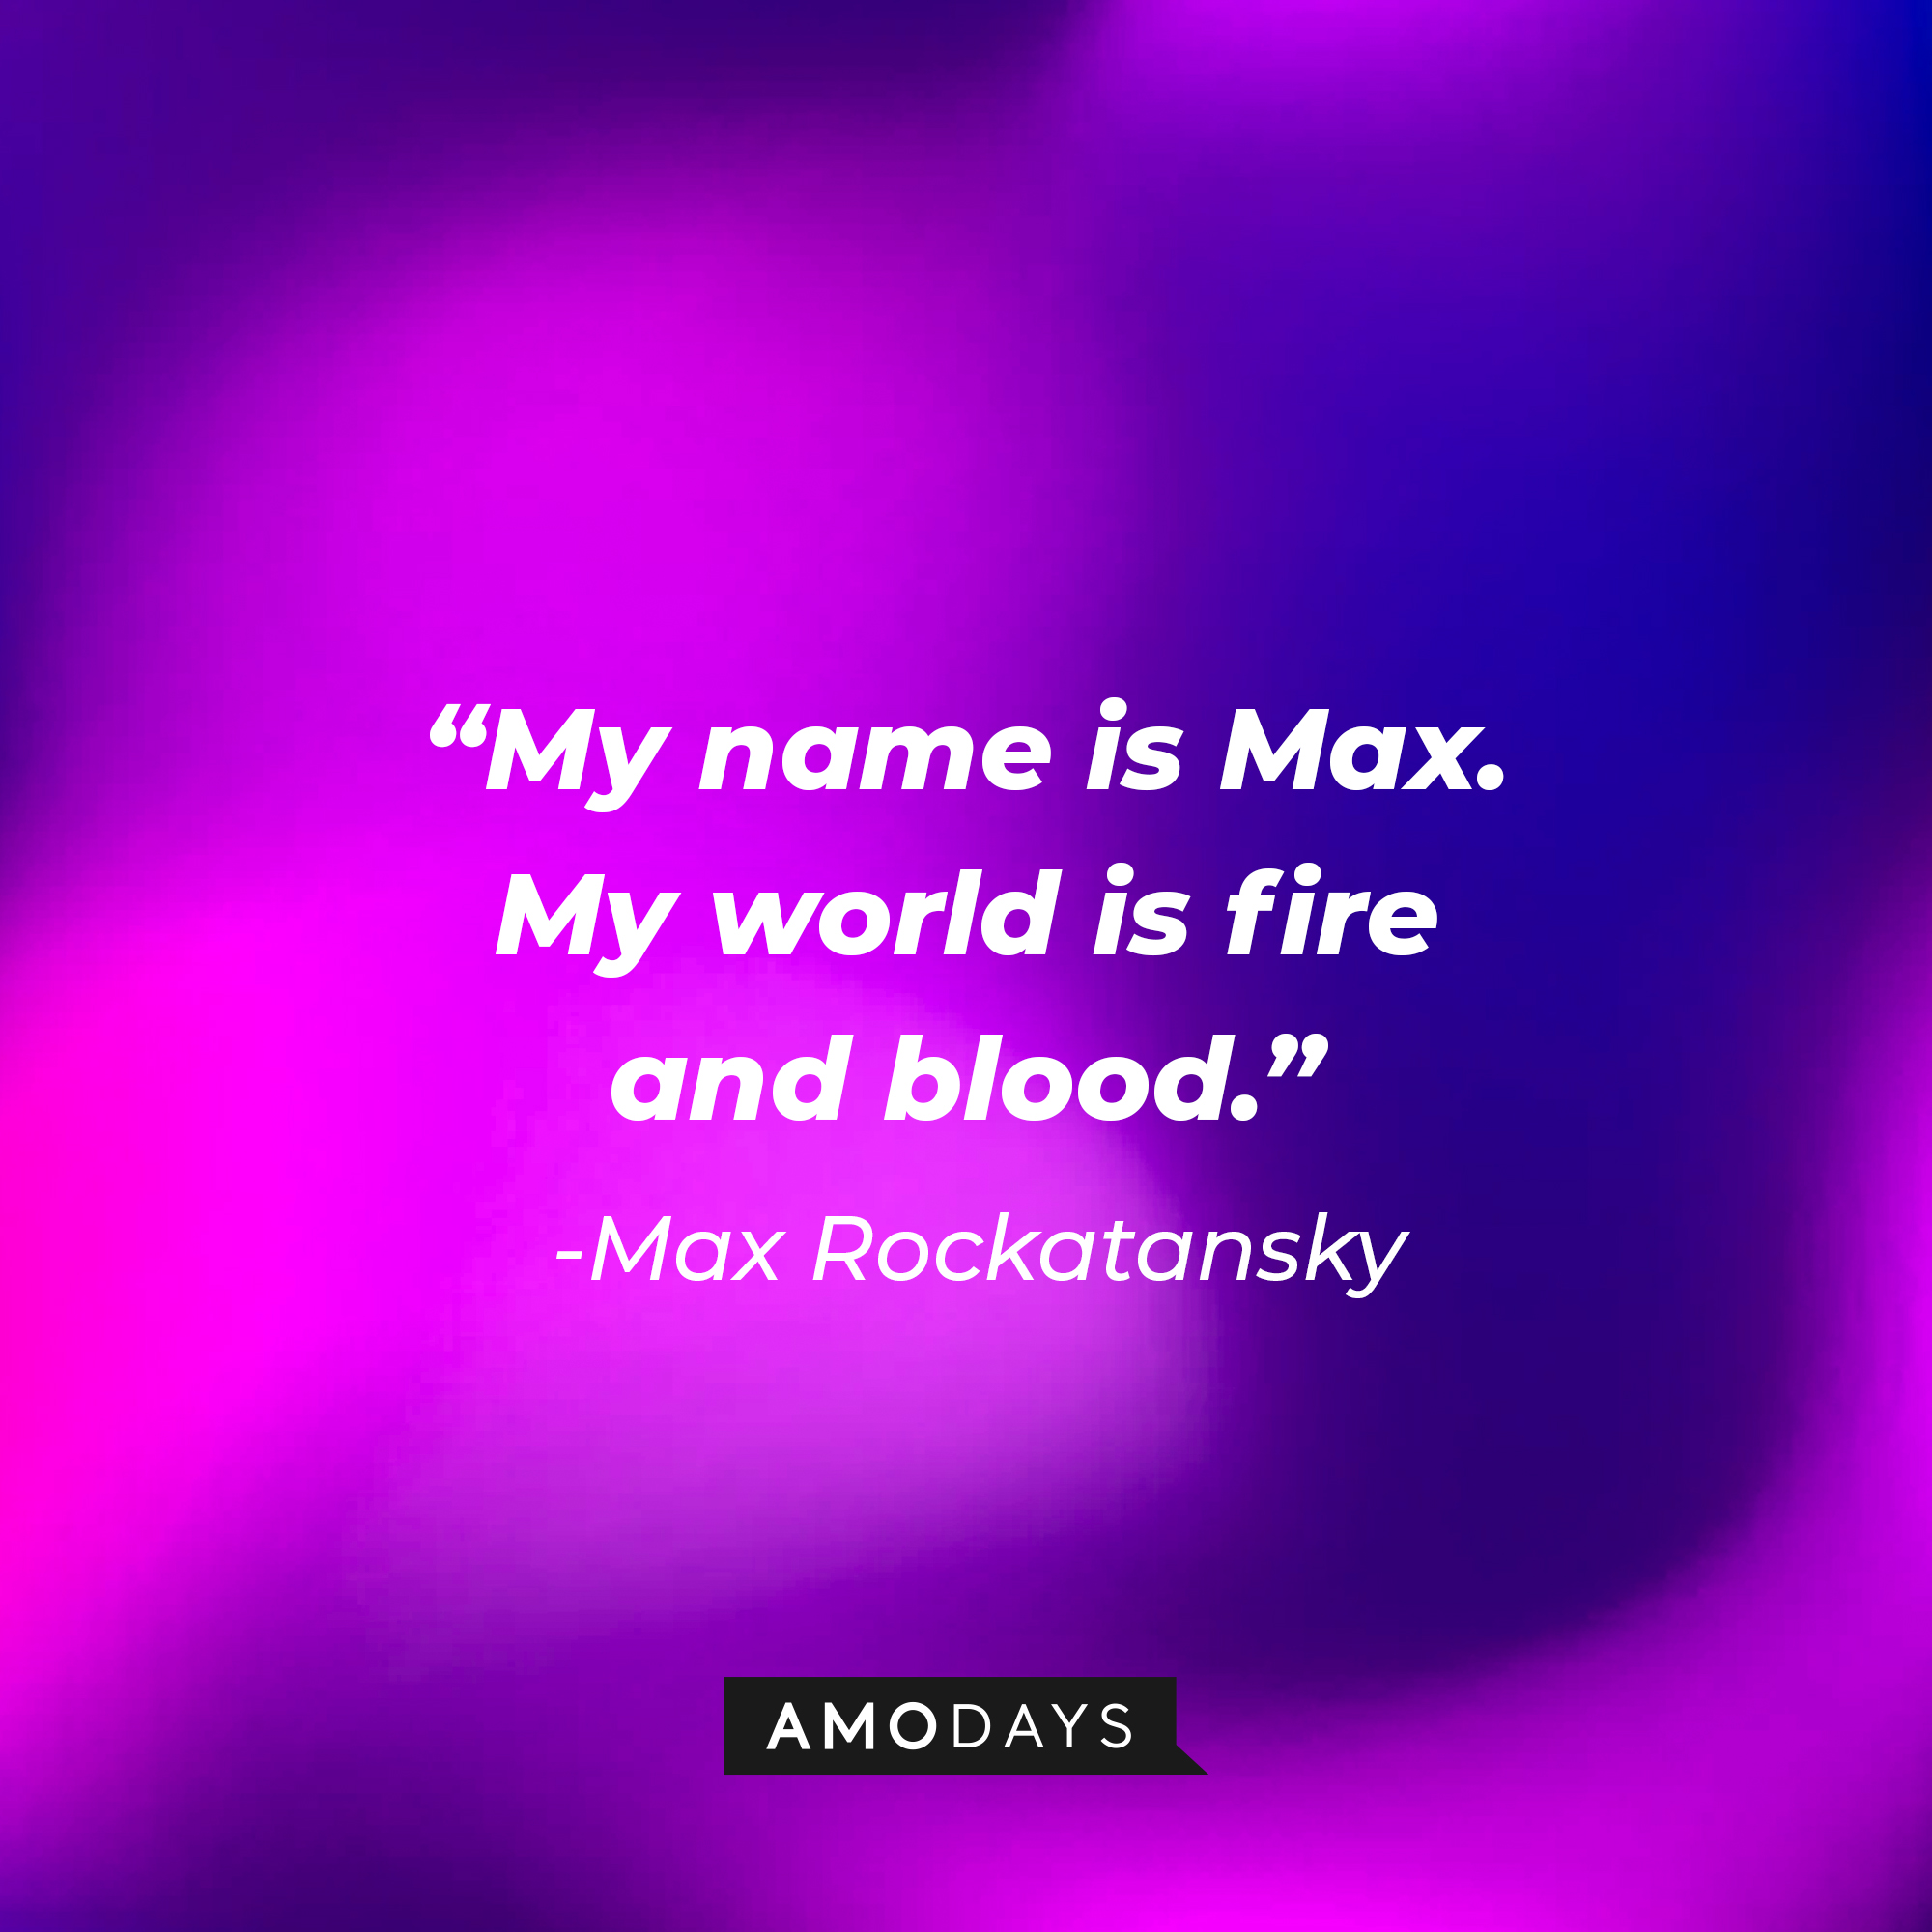 Max Rockatansky’s quote: “My name is Max. My world is fire and blood.” | Source: AmoDays